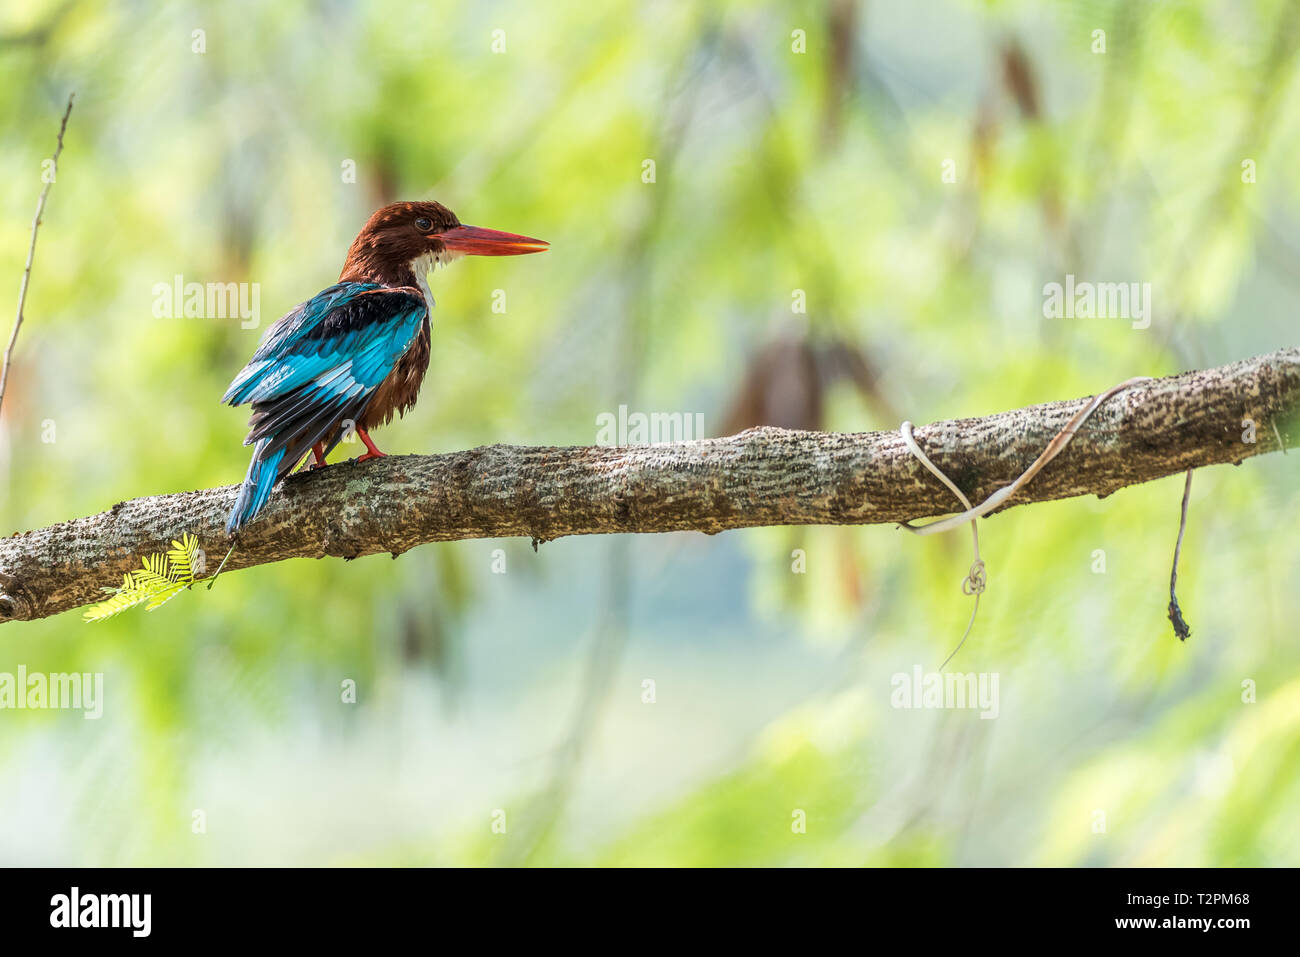 White Throated king fisher perched and posture Stock Photo